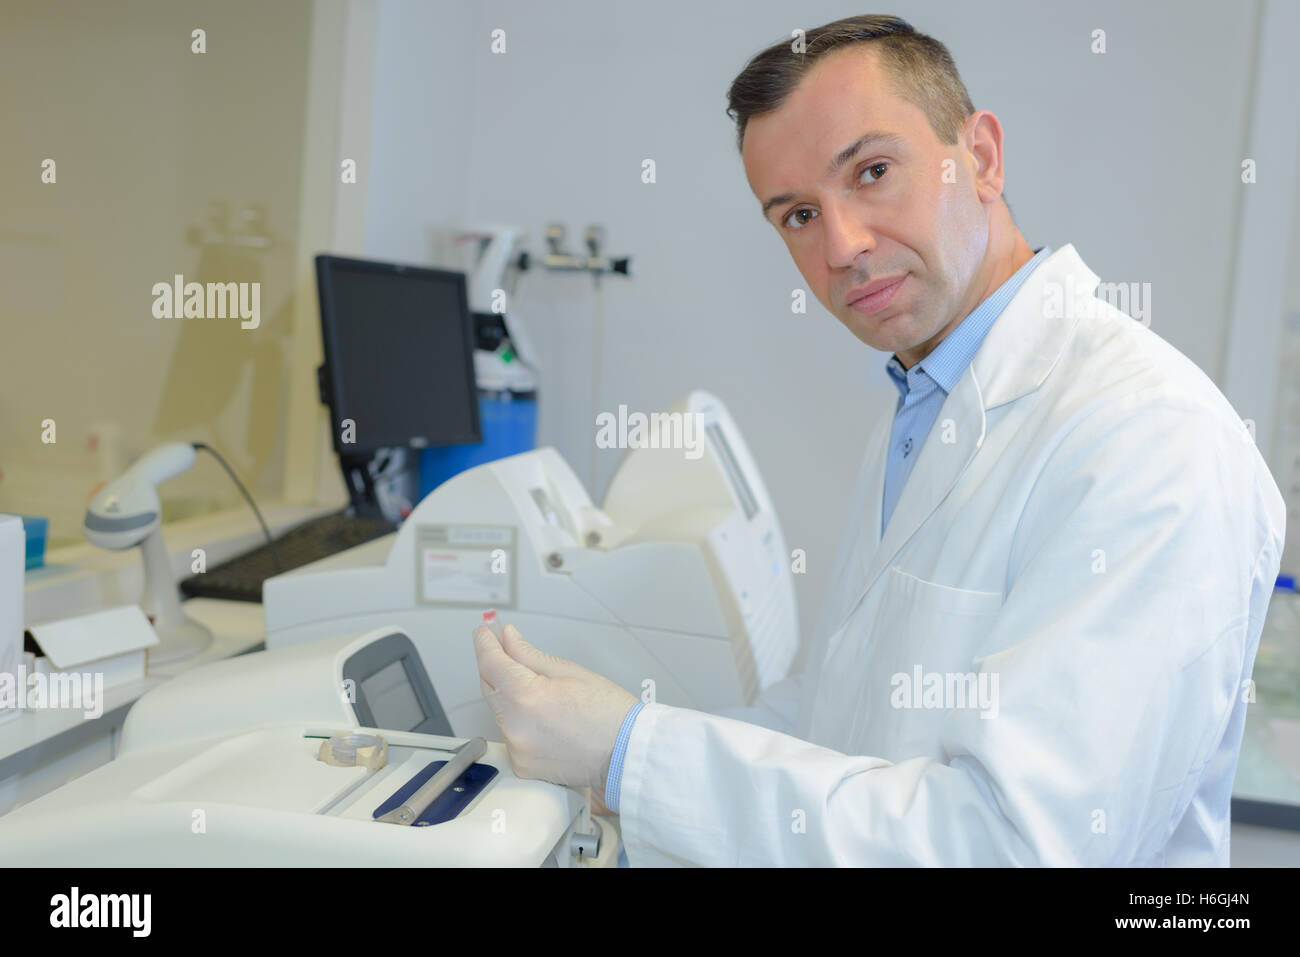 Portrait of lab technician at work Stock Photo